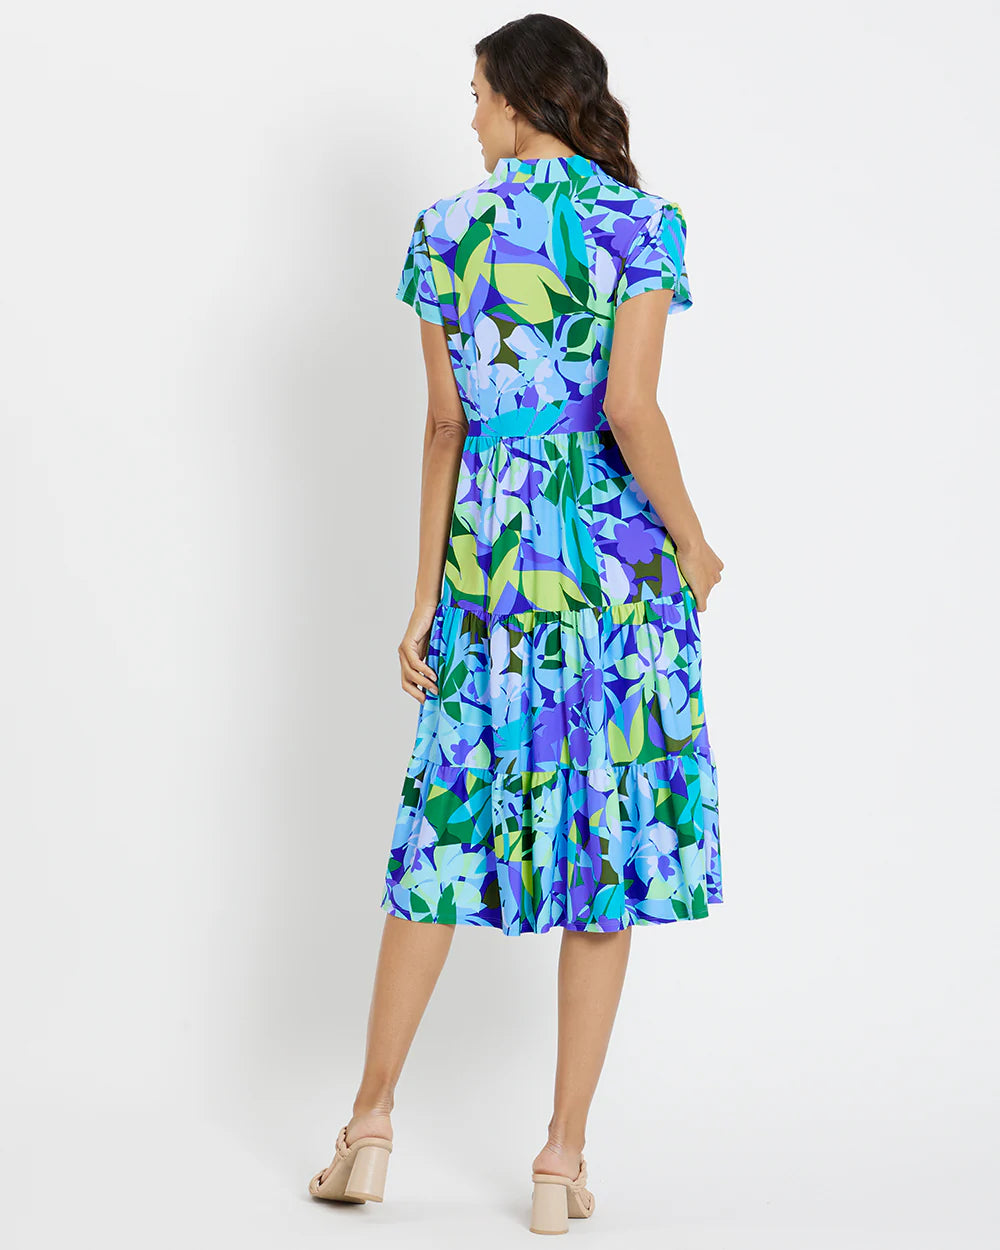 Libby Dress in Kaleidoscope Floral Iris - The French Shoppe